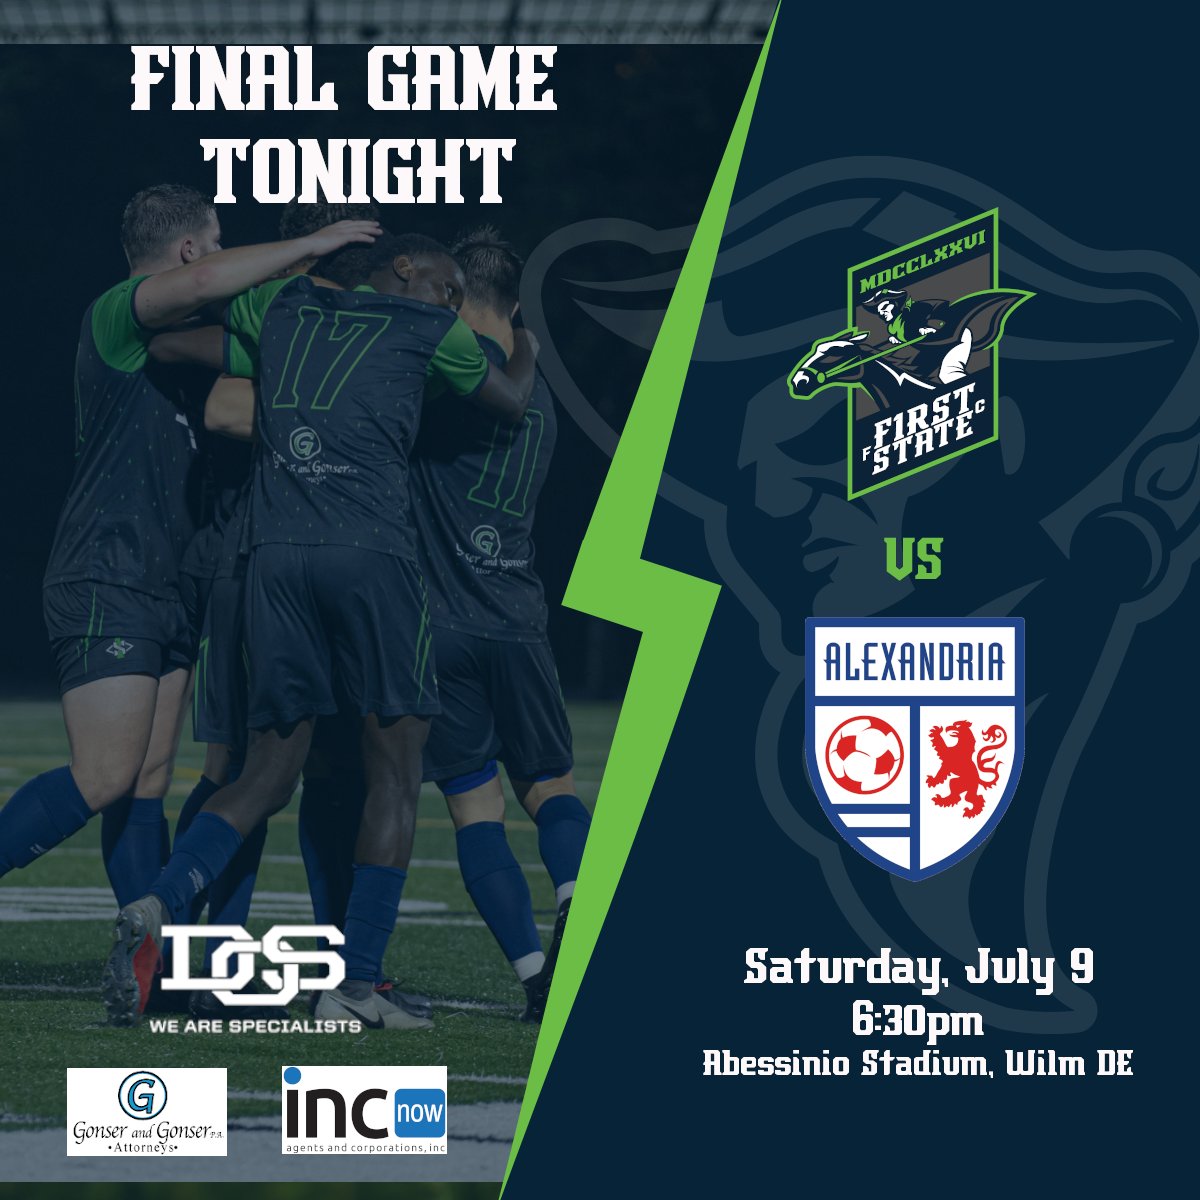 Last game of the szn tonight!! **Any kids wearing a soccer uniform/jersey gets FREE admission tonight!** Come out and cheer on the boys one more time this summer. 🆚 Alexandria Reds 🕜 630pm 🏟️ Abessinio Stadium 🚚 Maiale's food truck 🤤